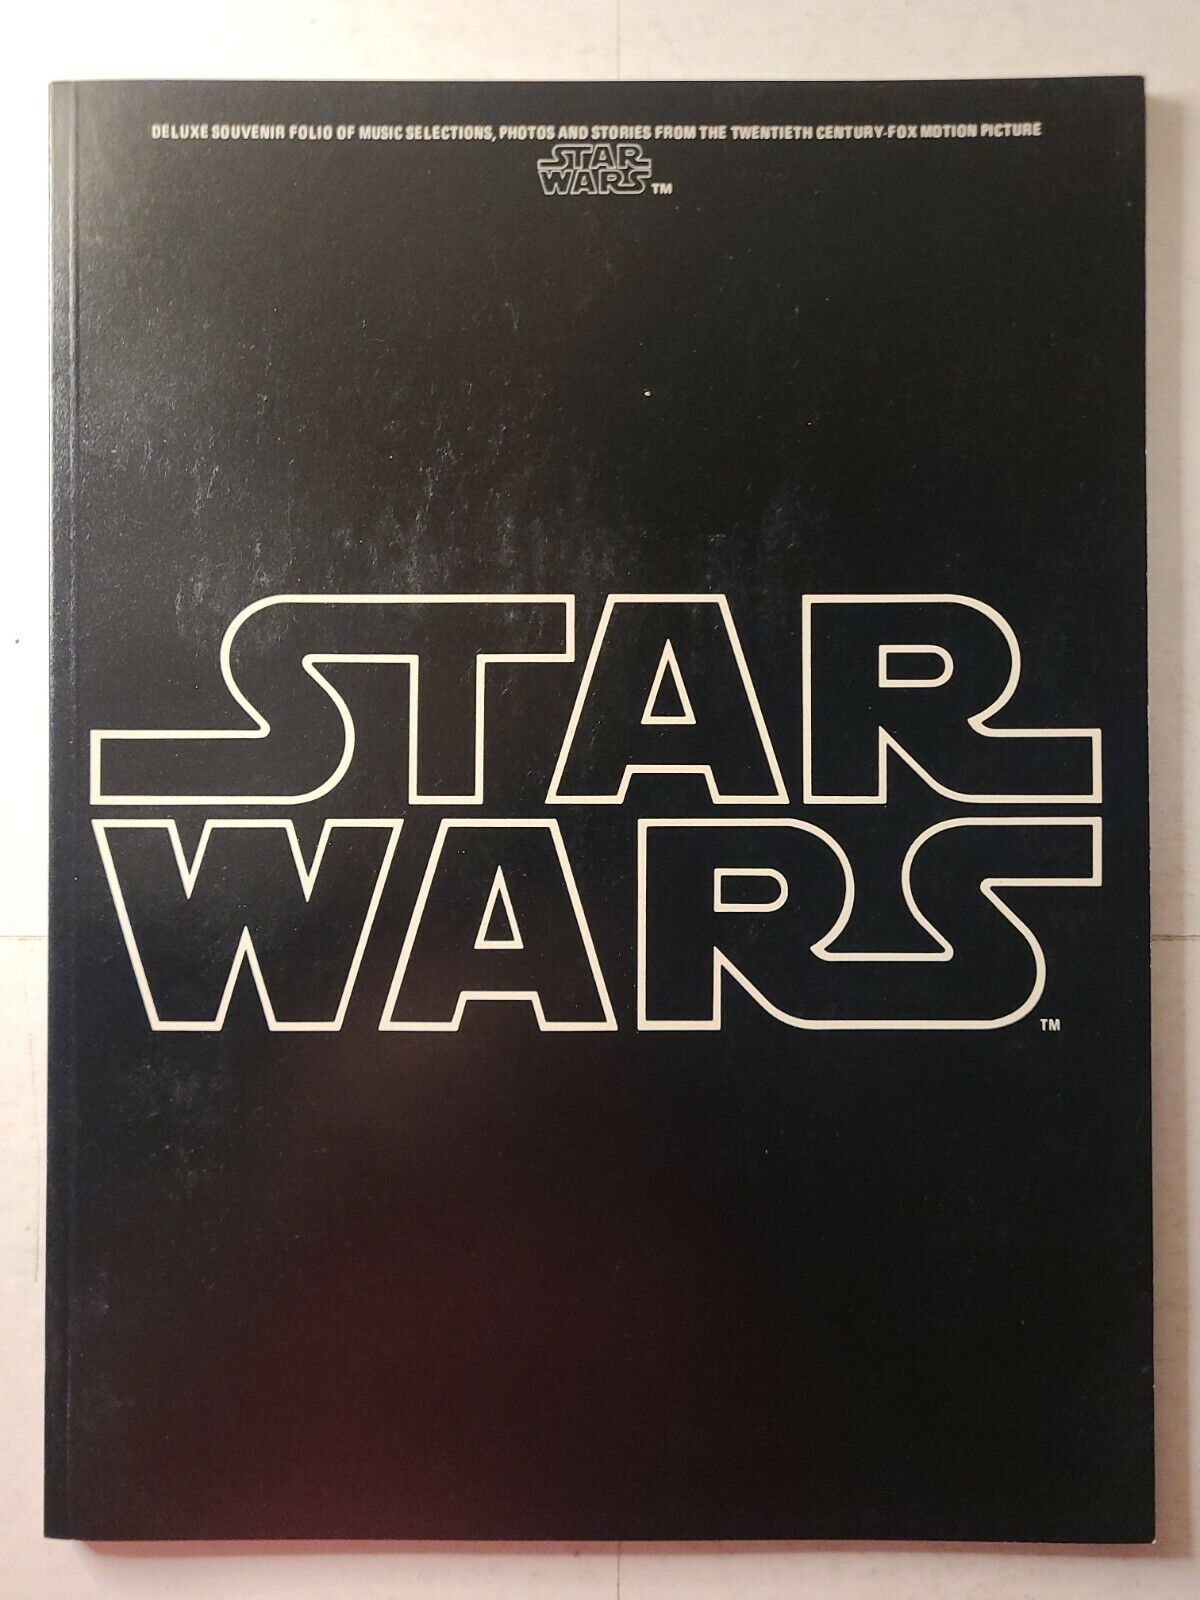 STAR WARS Souvenir Folio of Photos and Music Selections from JOHN WILLIAMS 1977